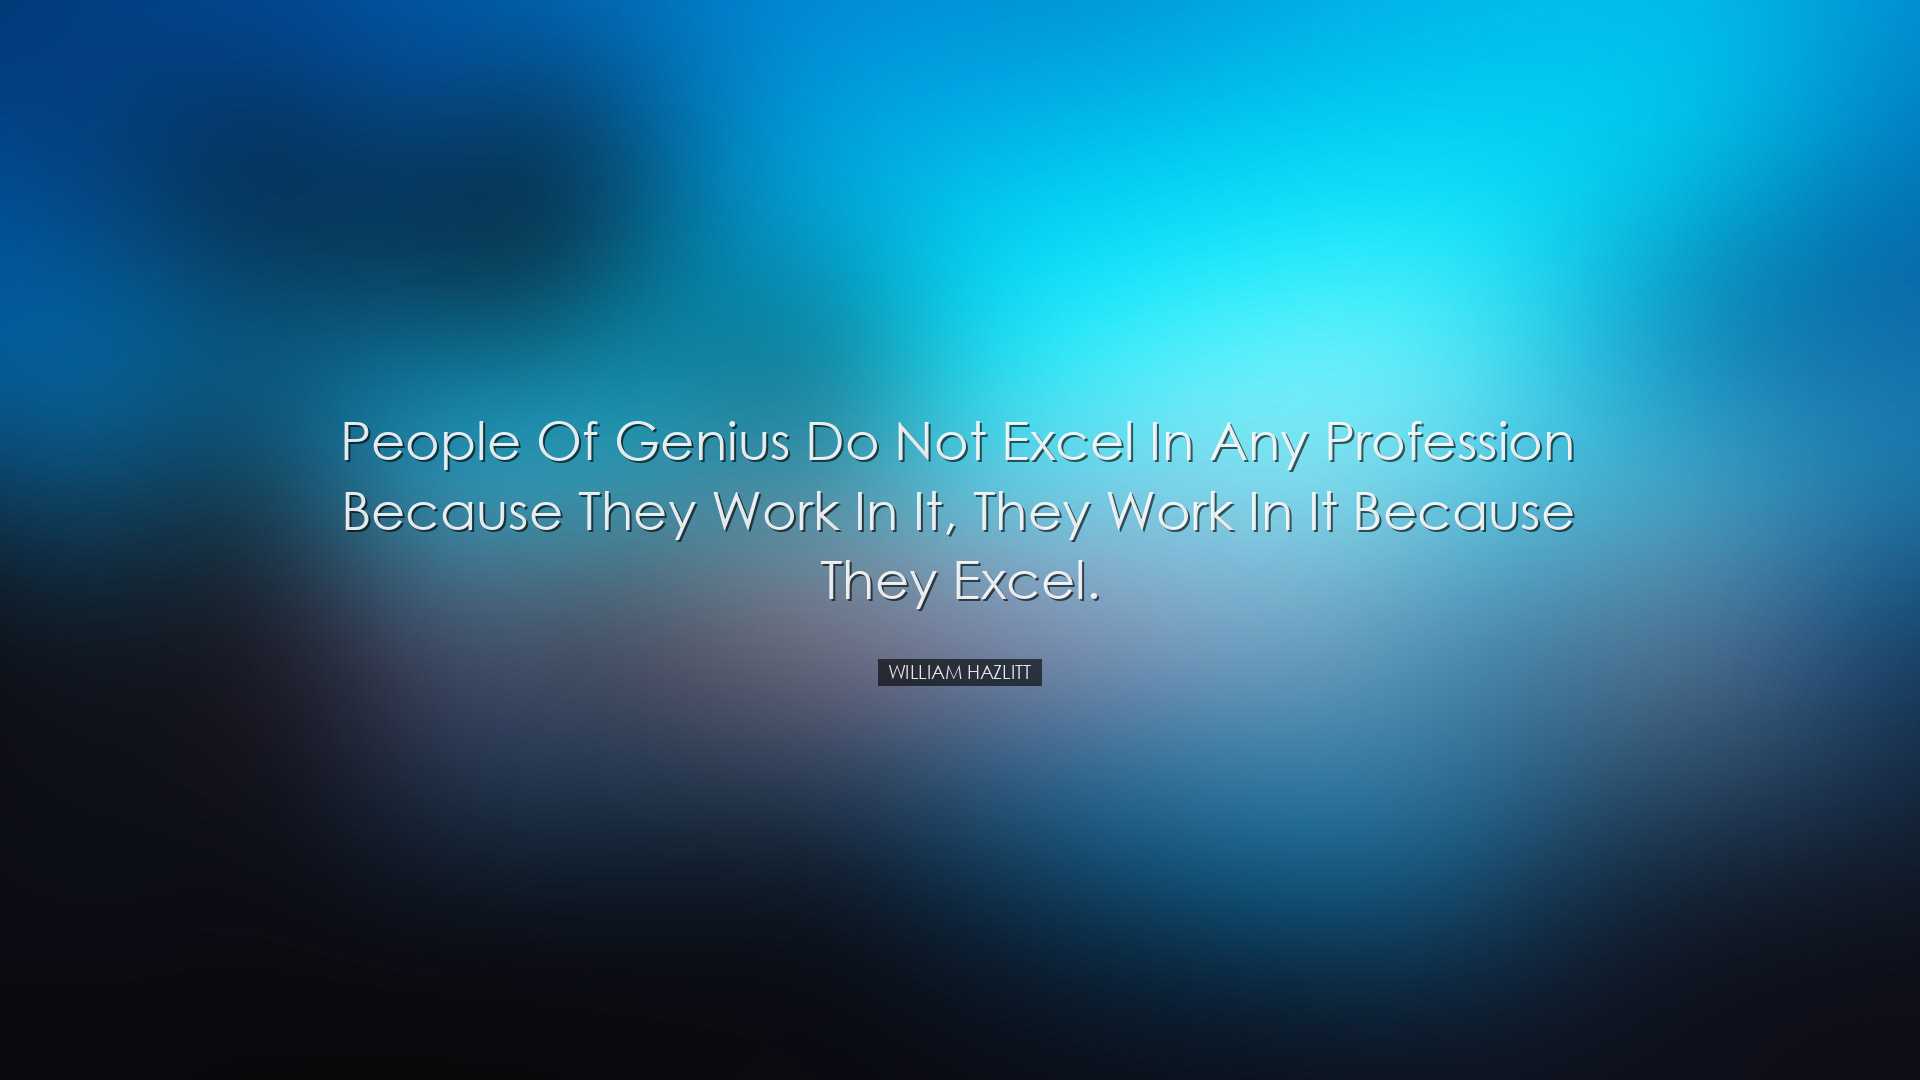 People of genius do not excel in any profession because they work